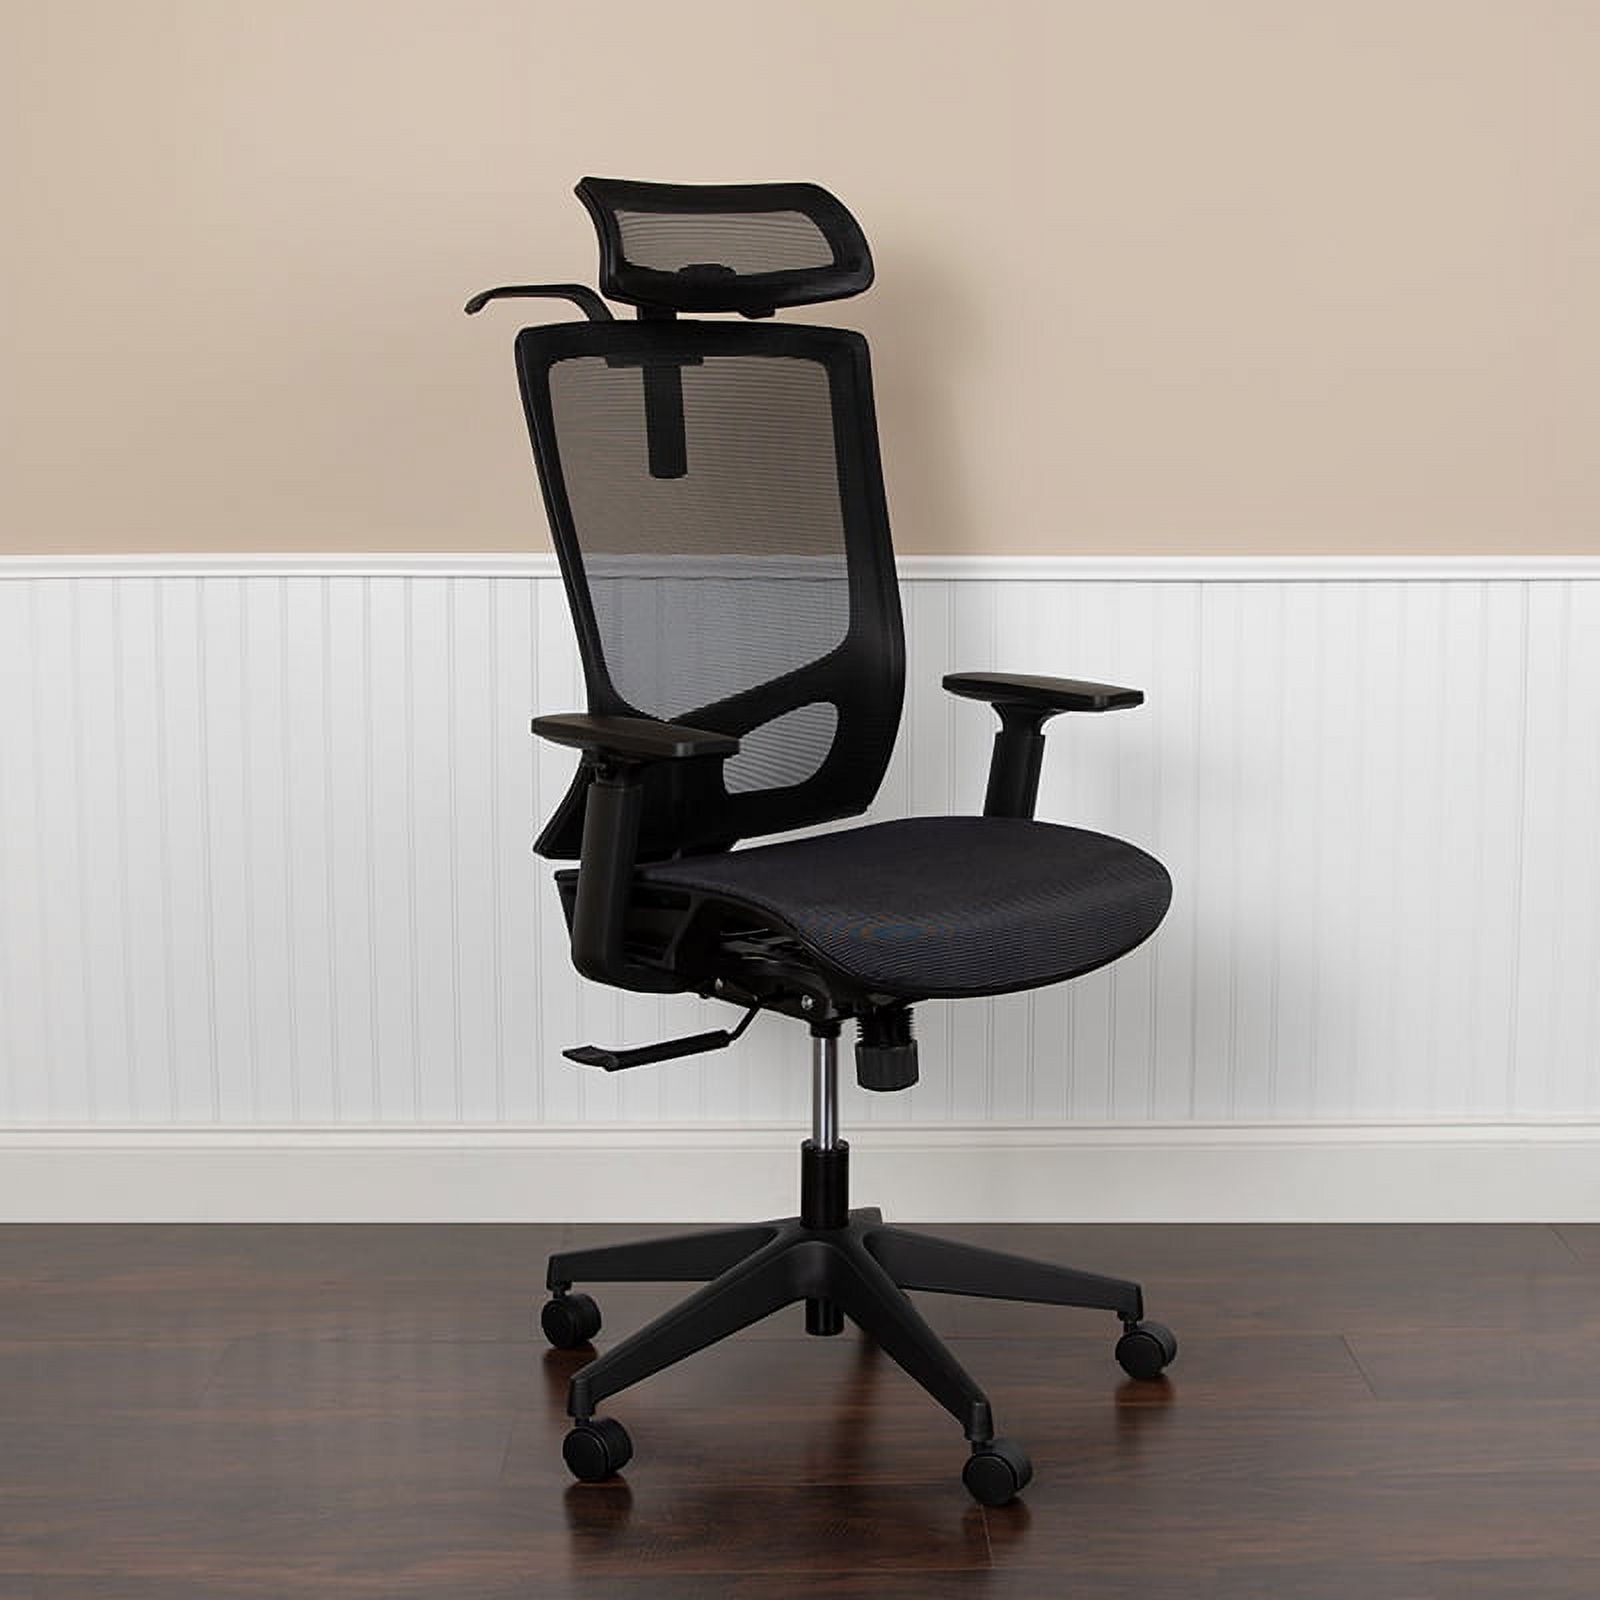 Flash Furniture Ergonomic Mesh Office Chair with Synchro-Tilt, Pivot Adjustable Headrest, Lumbar Support, Coat Hanger and Adjustable Arms in Black [H-2809-1KY-BK-GG] - image 1 of 5